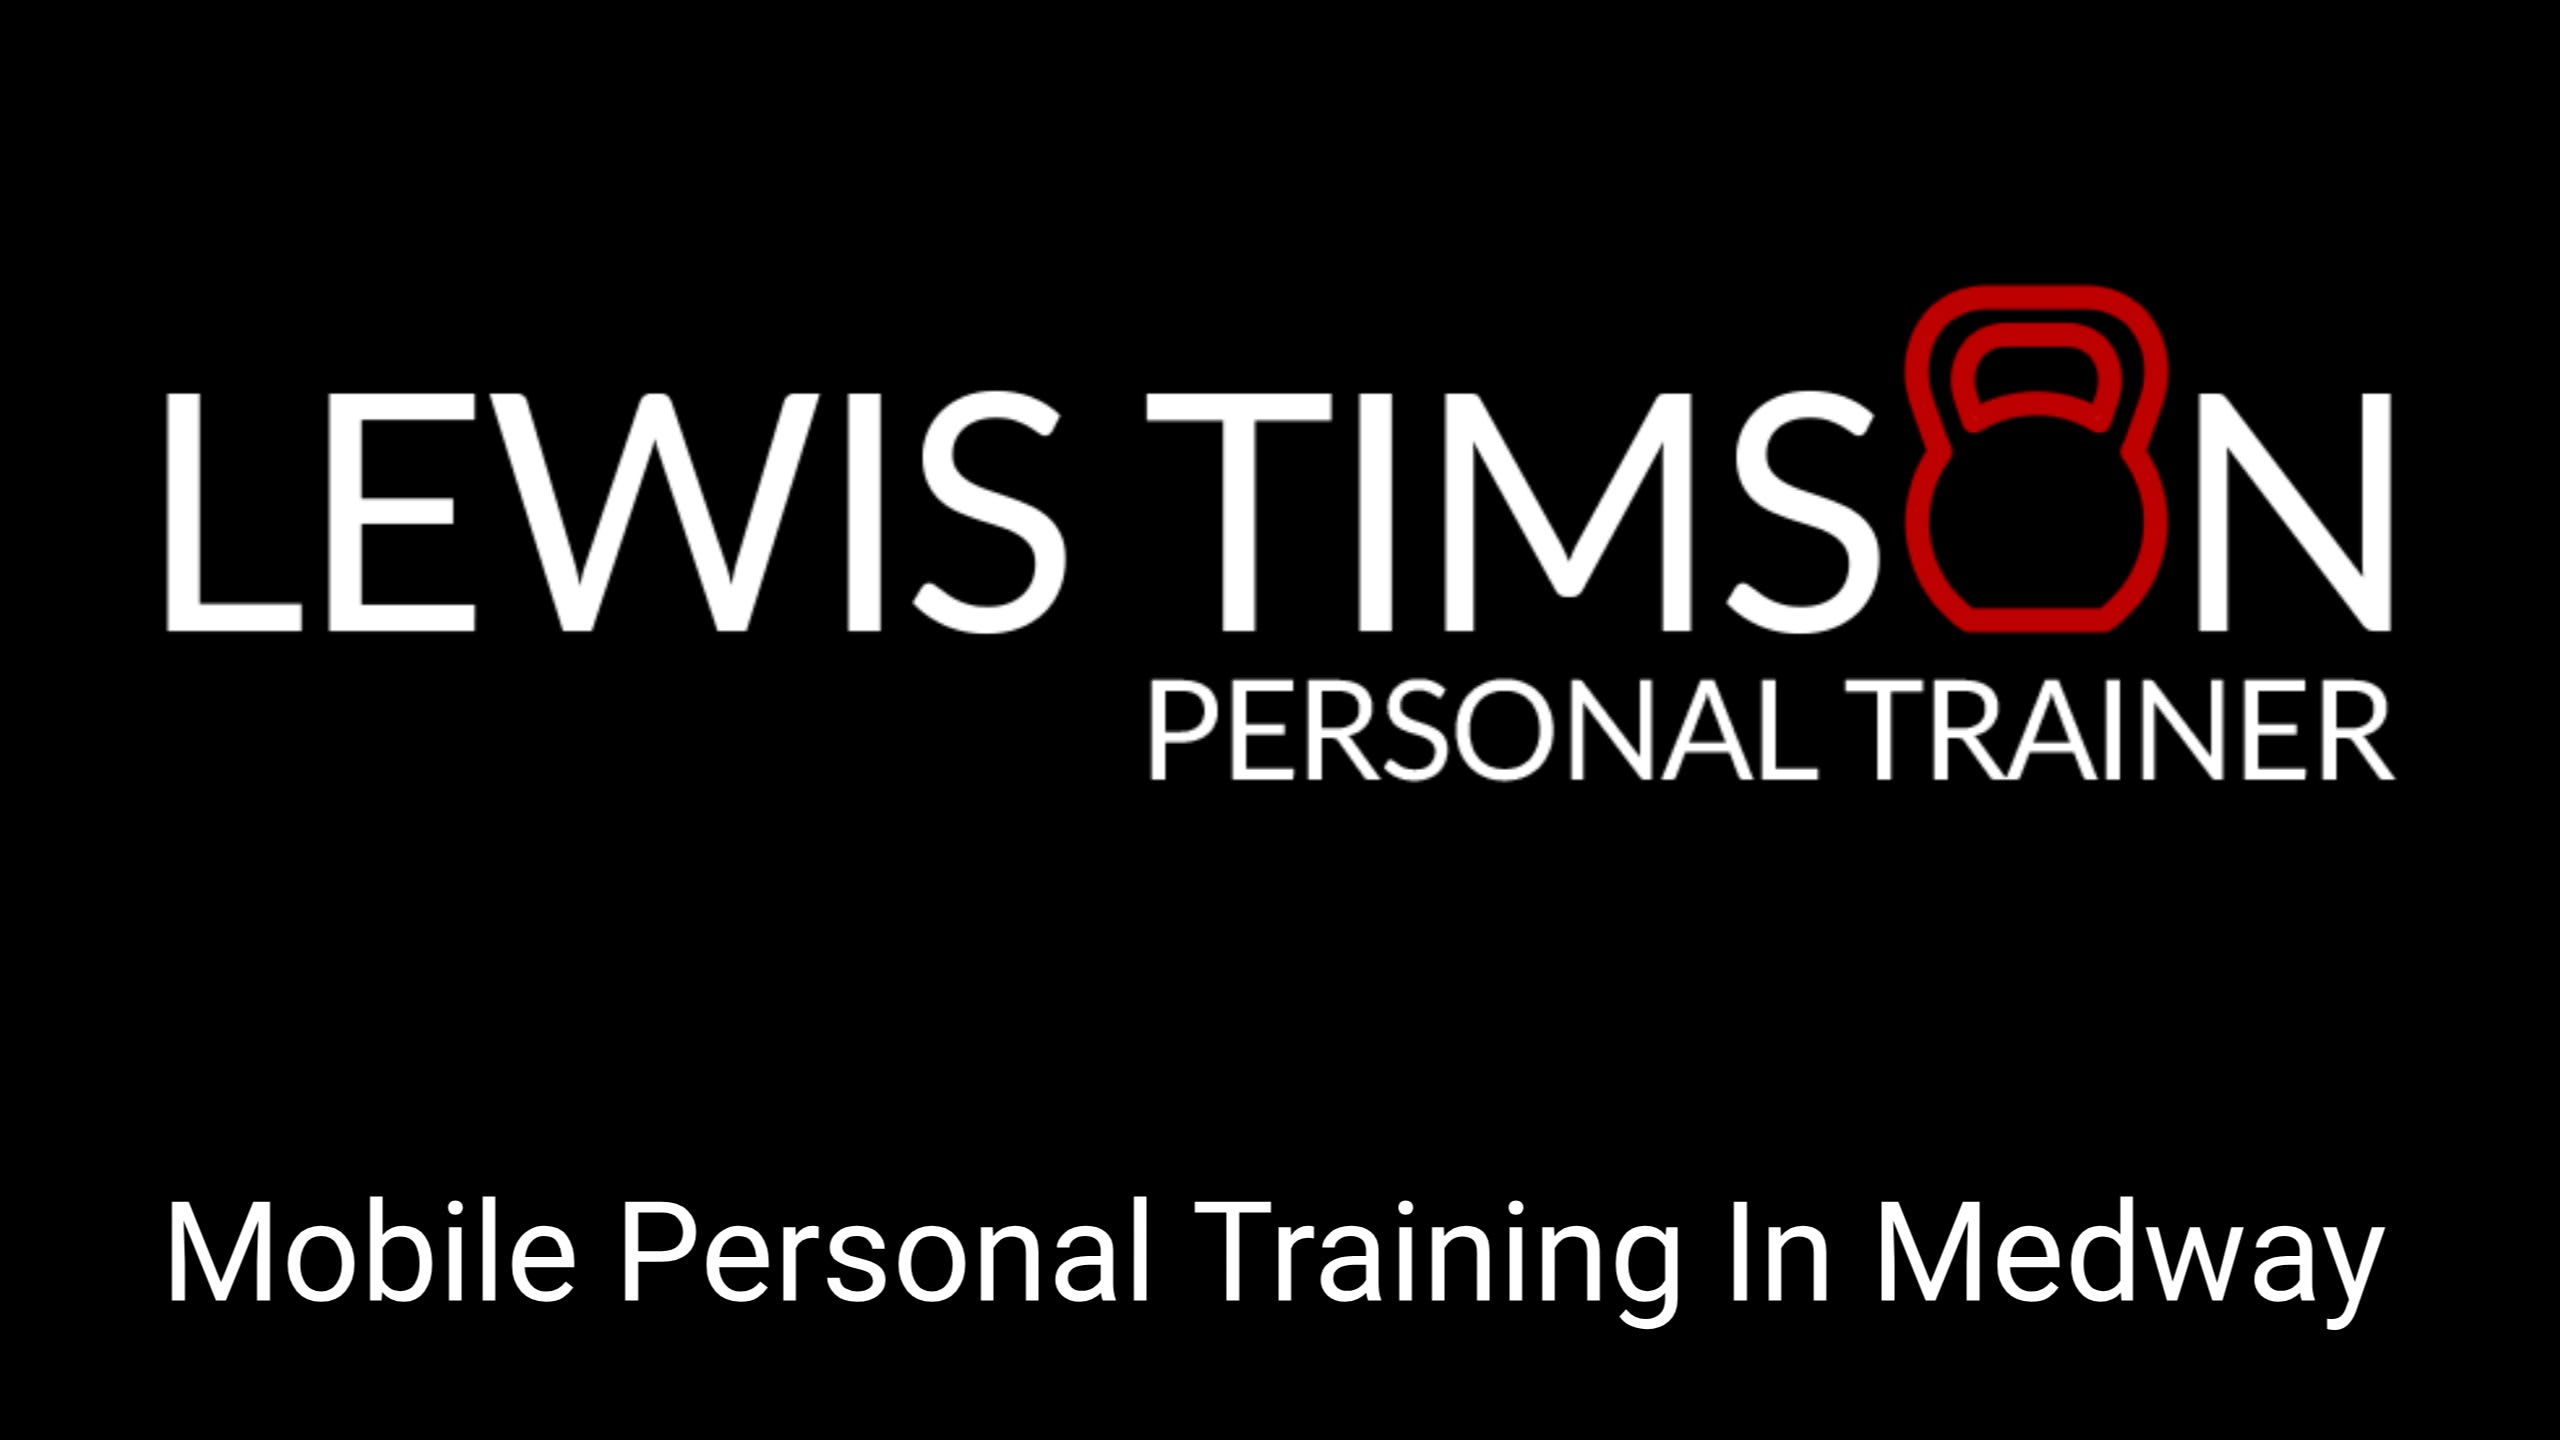 Lewis Timson Personal Trainer